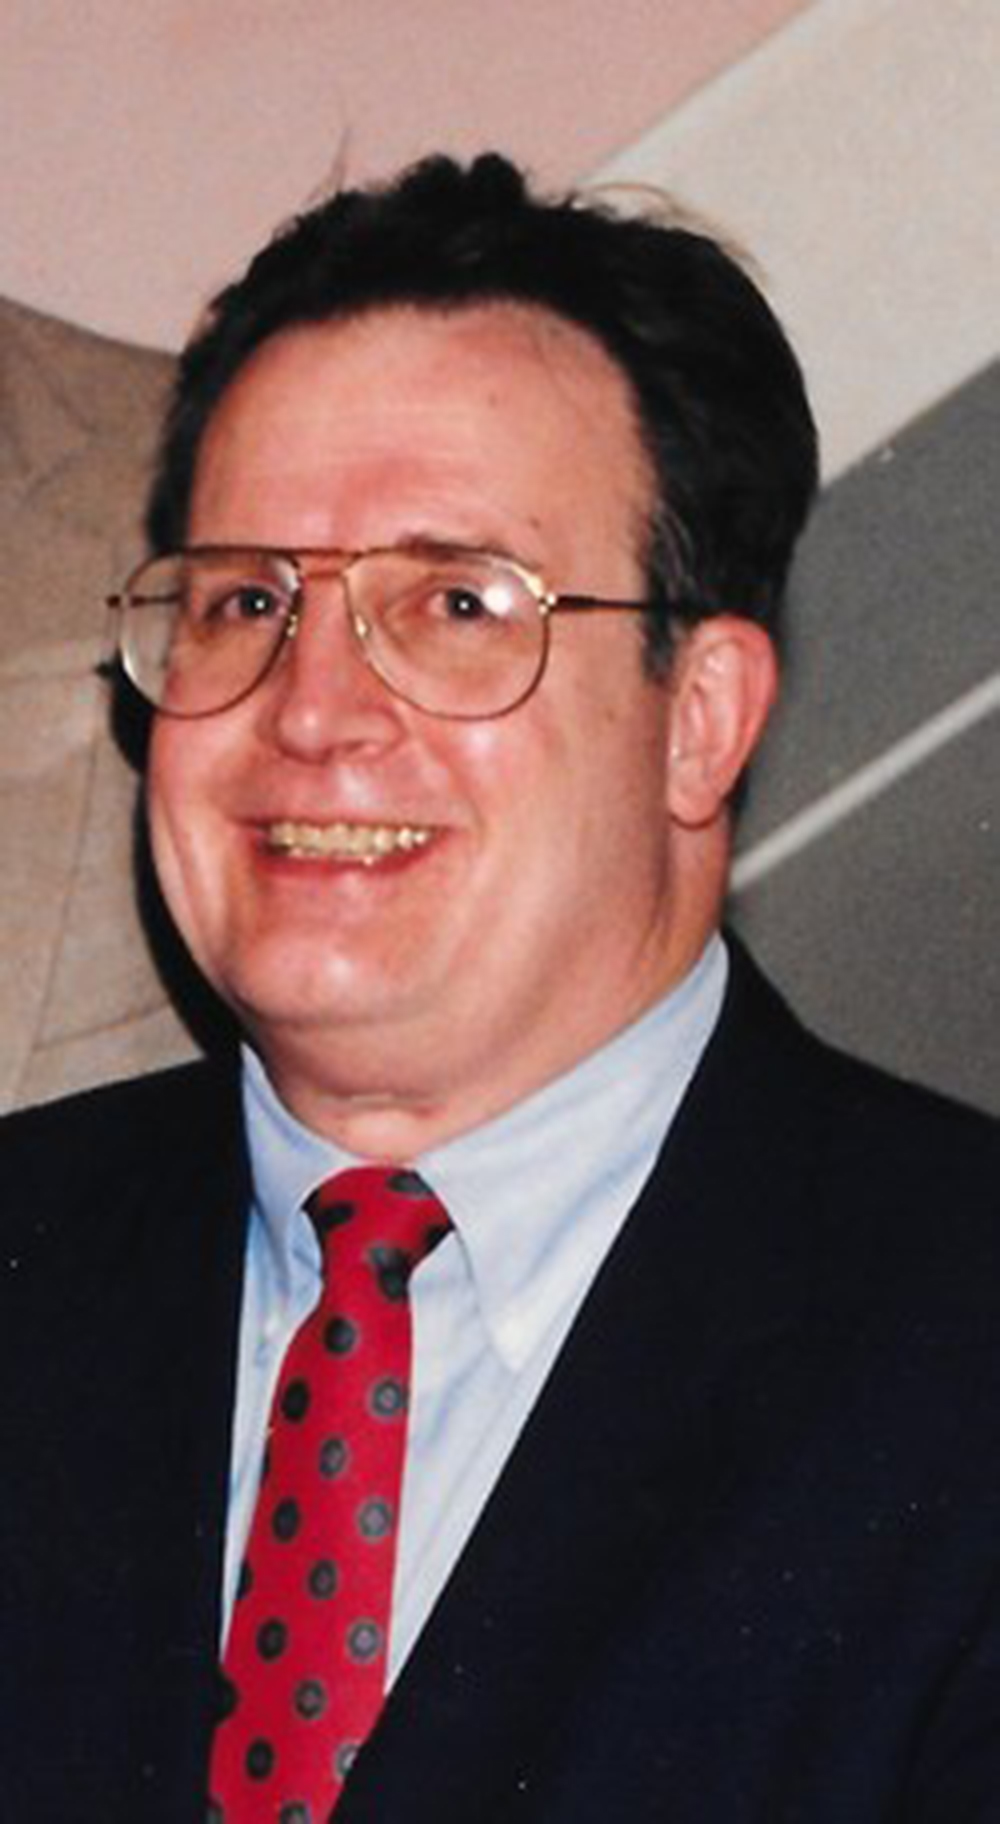 The late Donald Rossin was an elderly white man with short, jet black hair and a pair of aviator glasses. He is smiling in this photo, wearing a navy suit jacket over a white button up and a red/black polka dot tie.